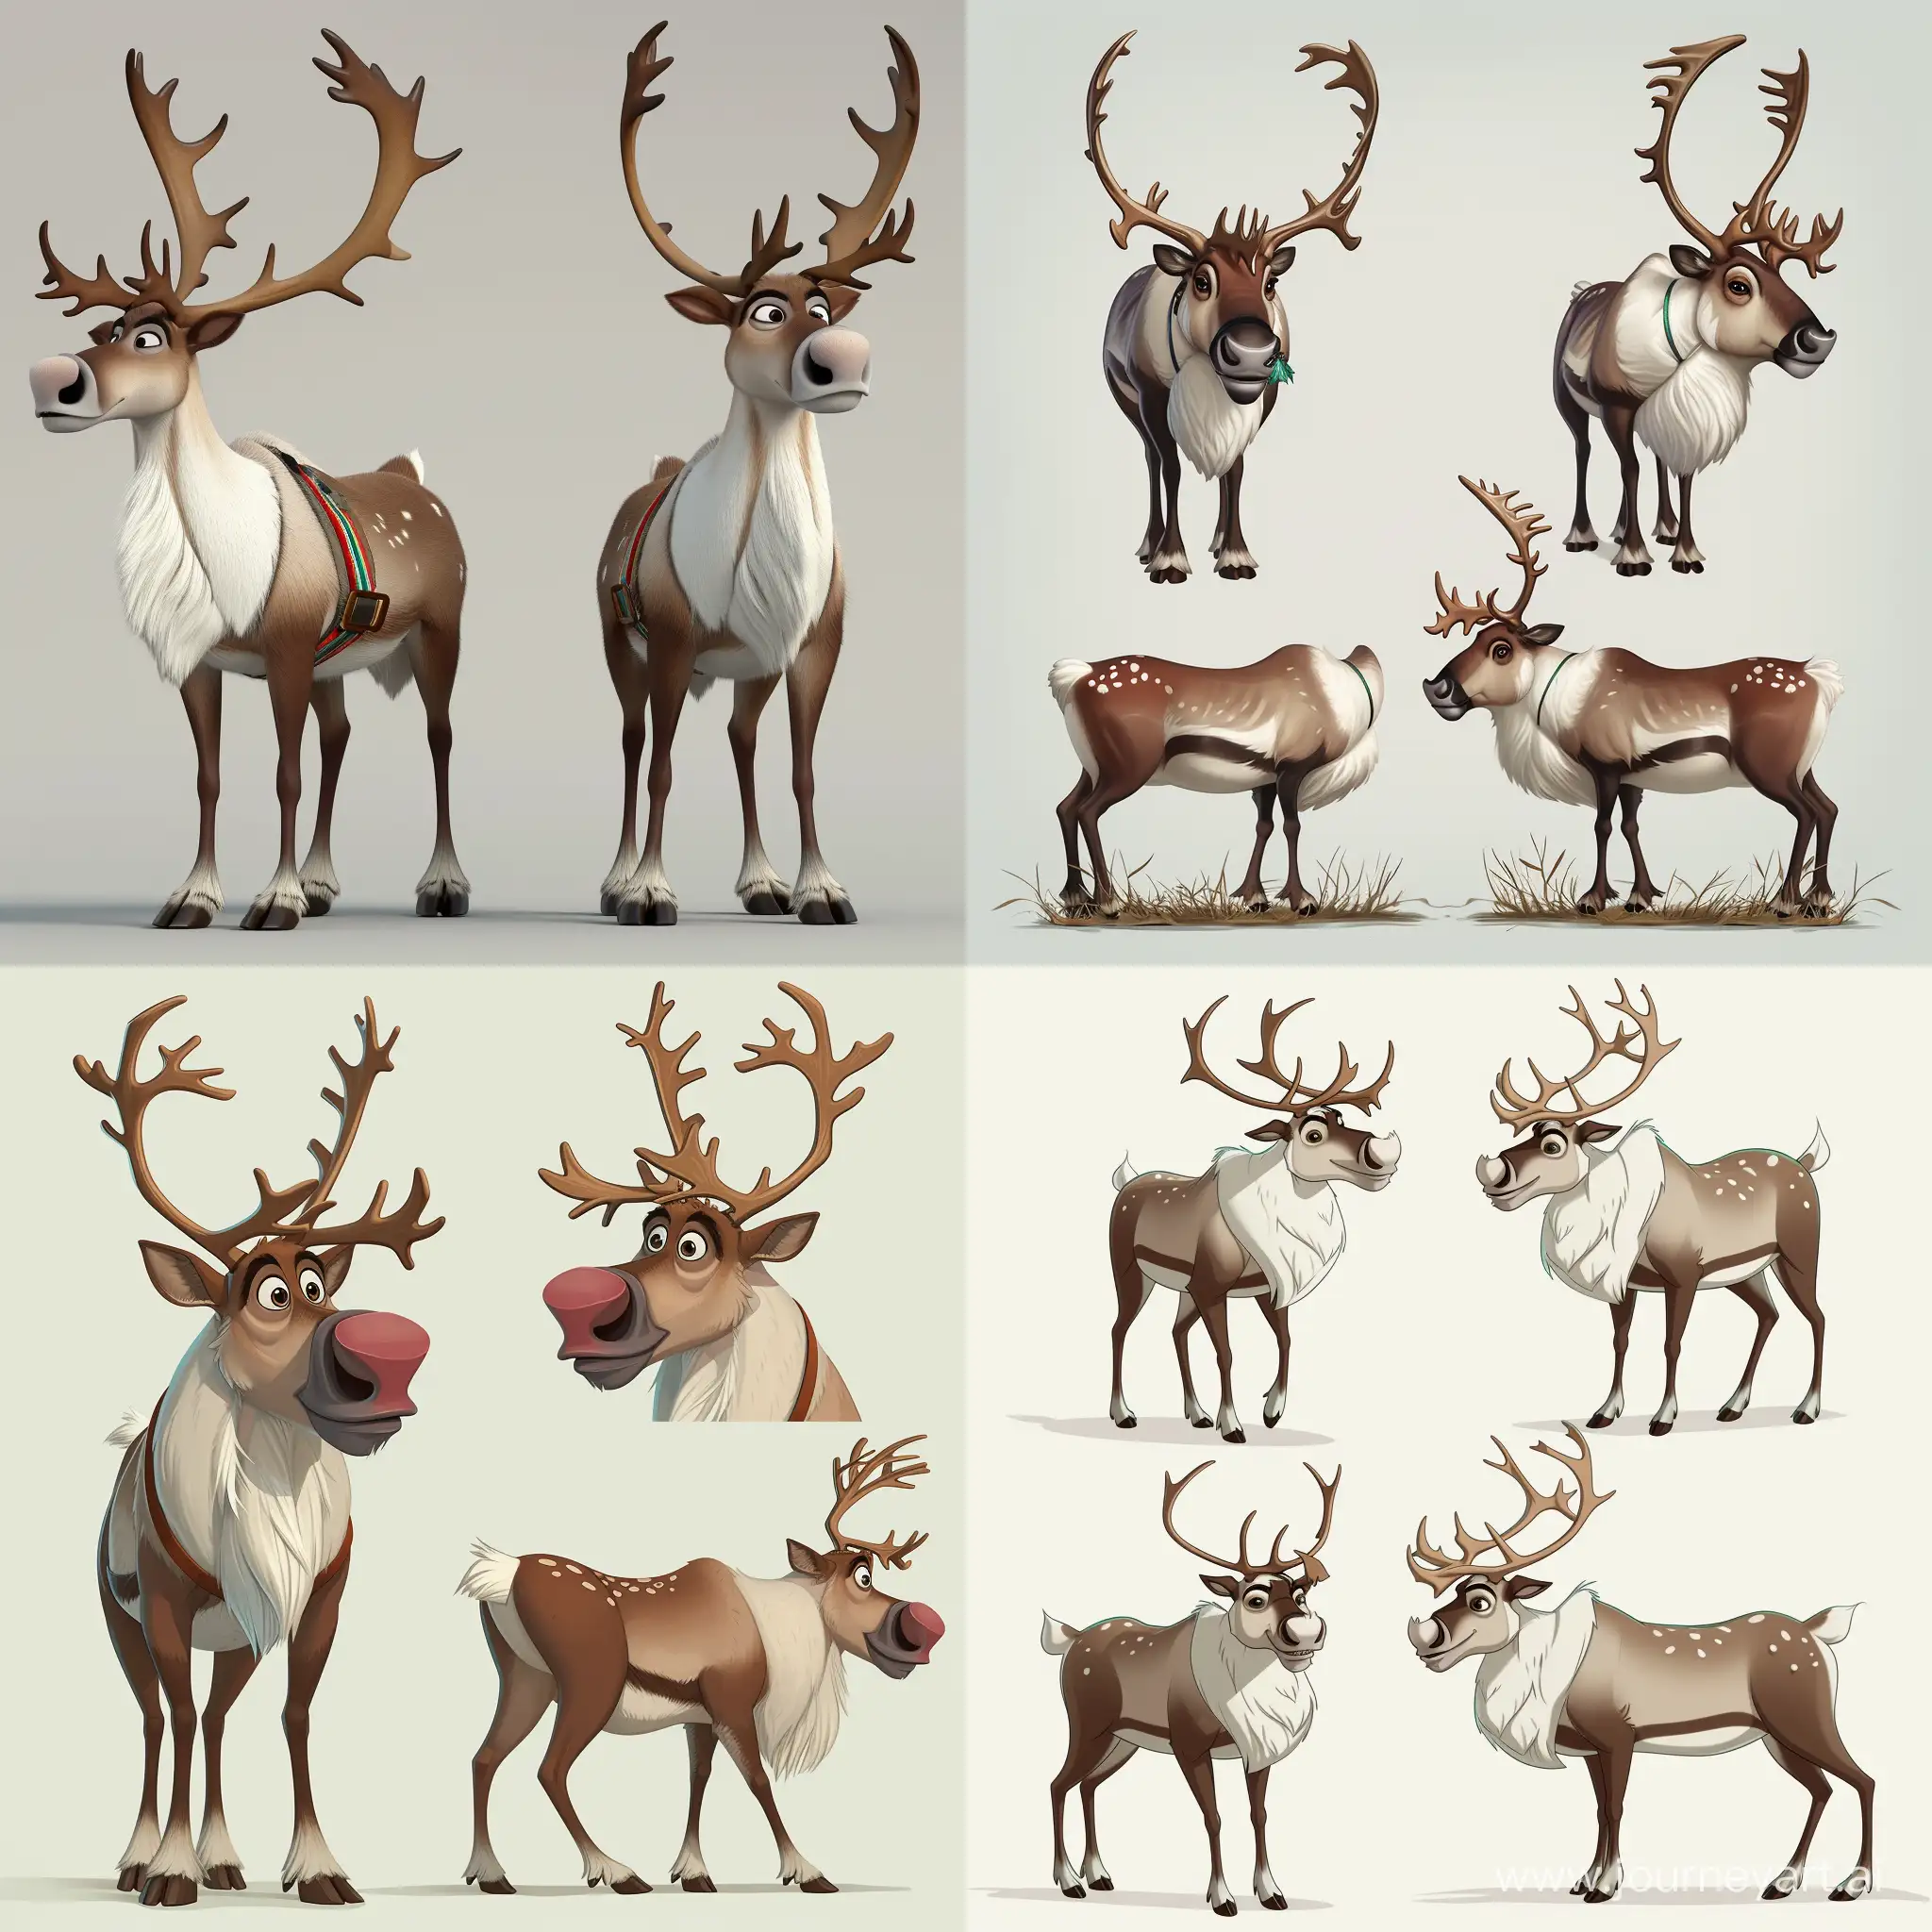 Detailed-Reindeer-in-Cartoon-Style-Front-Side-and-Top-View-with-Woolly-Features